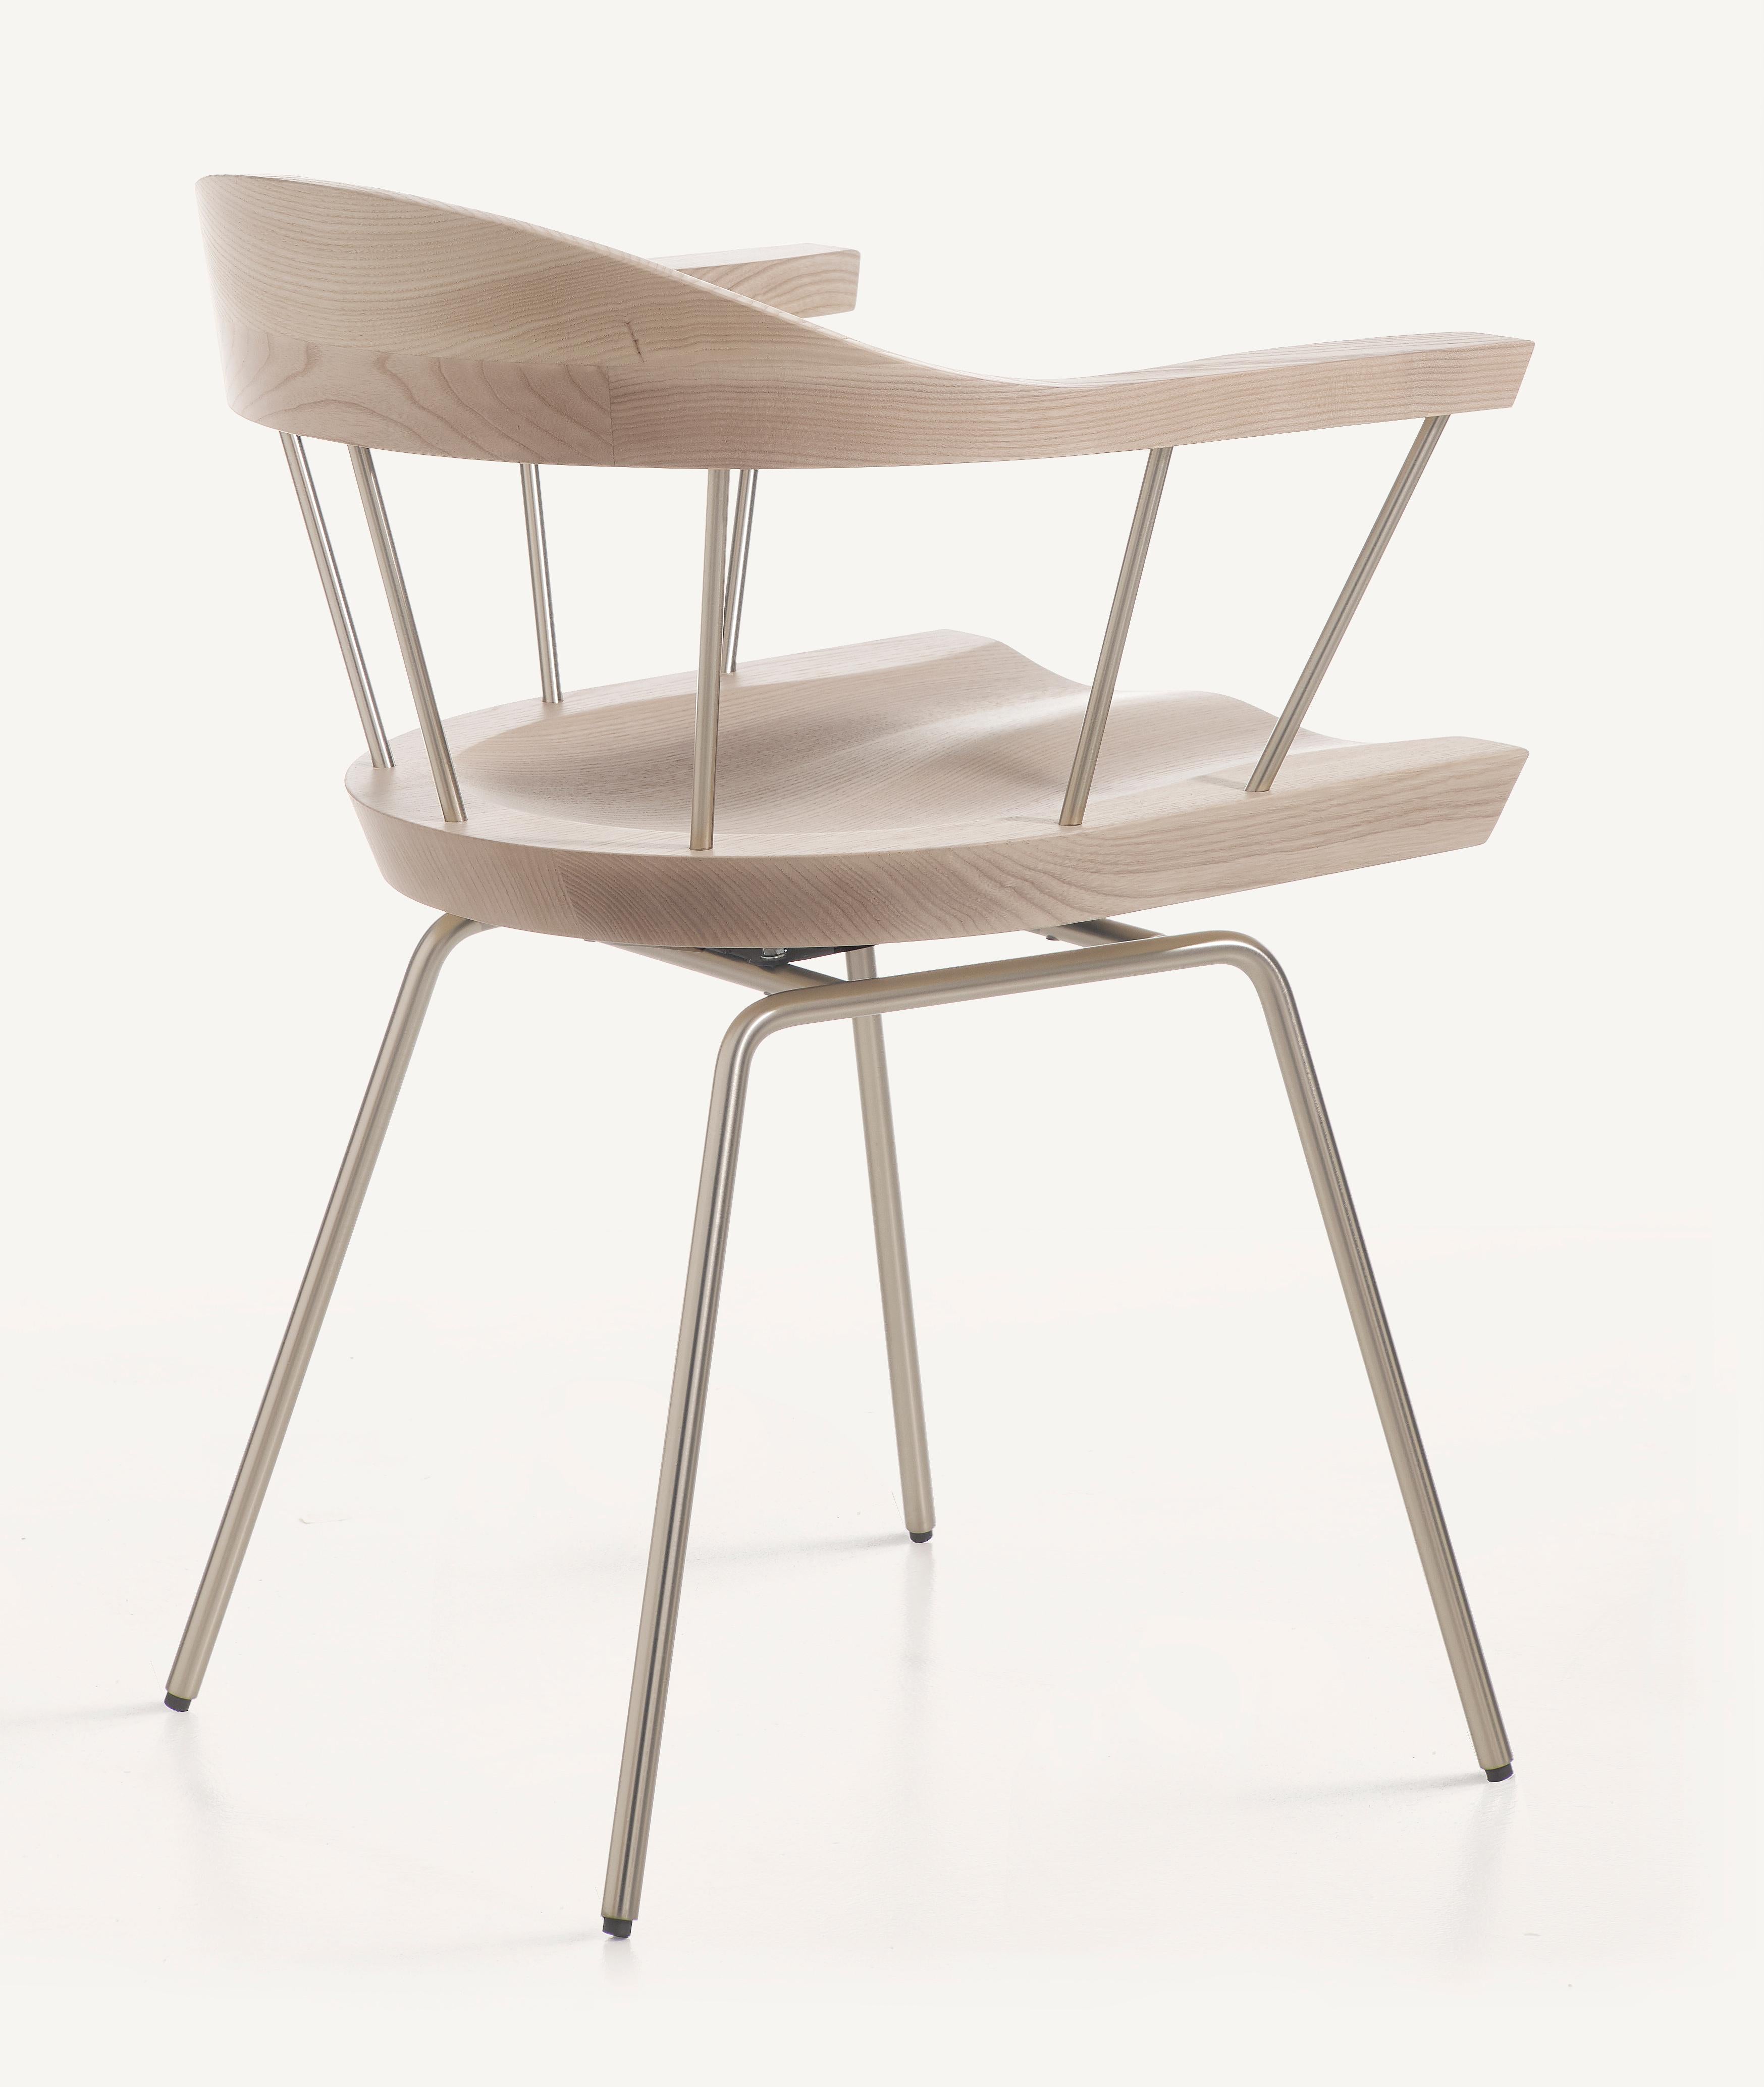 For Sale: Silver (Metal Satin Nickel) Spindle Chair in Solid, Carved White Ash and Steel Designed by Craig Bassam 2